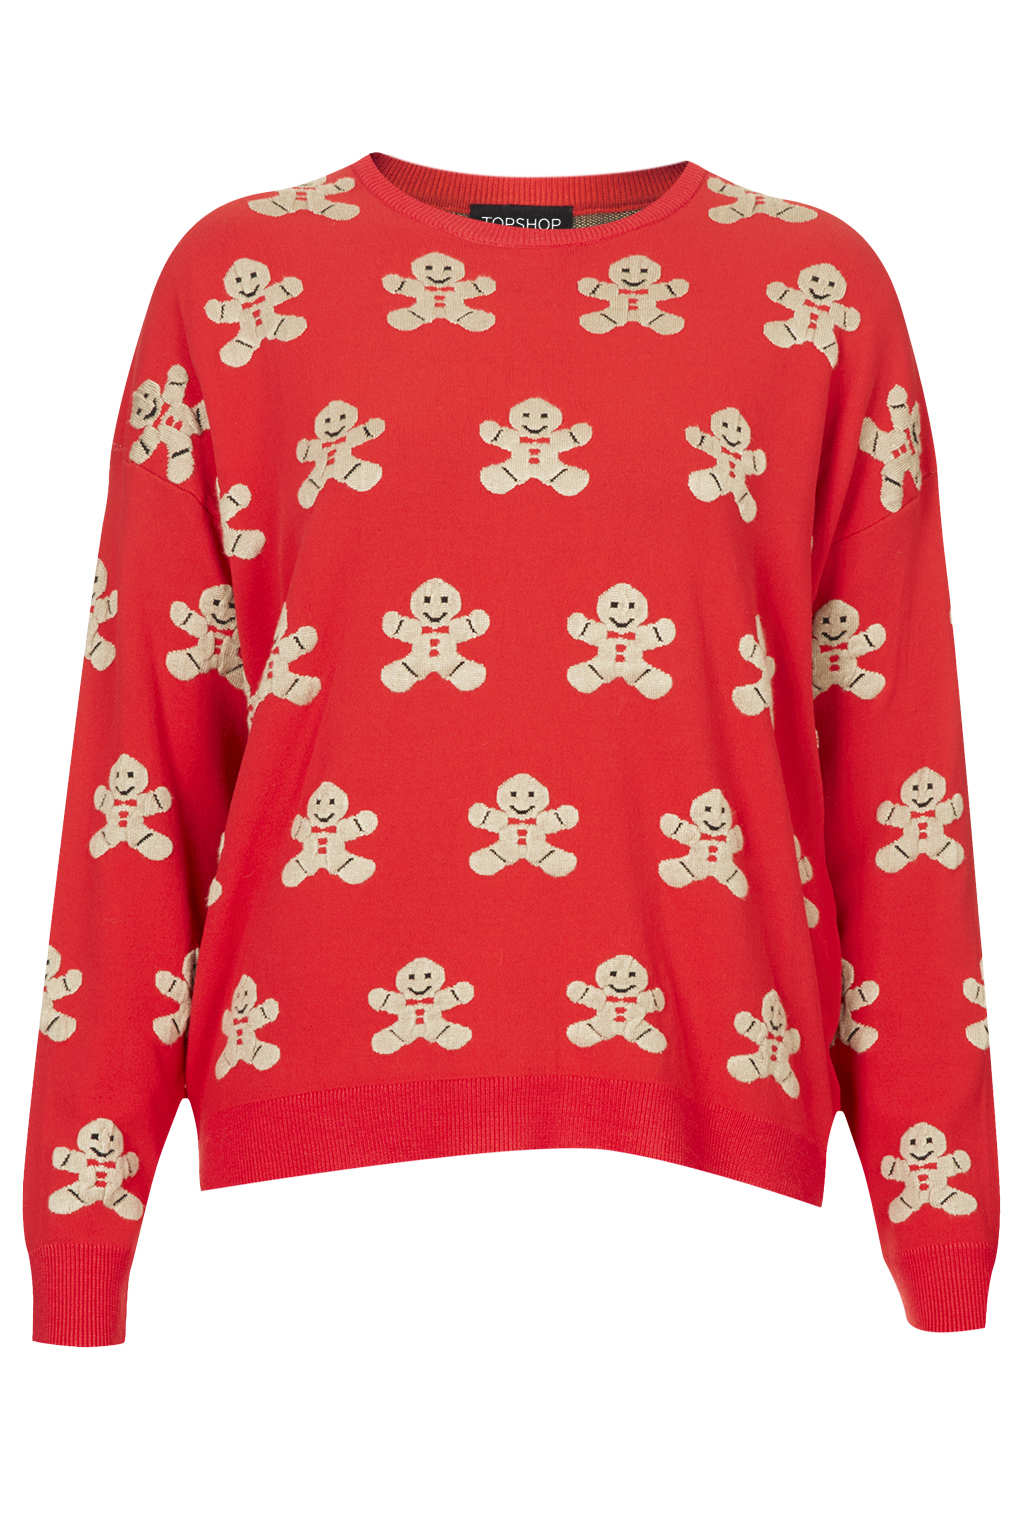 TOPSHOP Knitted Gingerbread Man Jumper in Red - Lyst